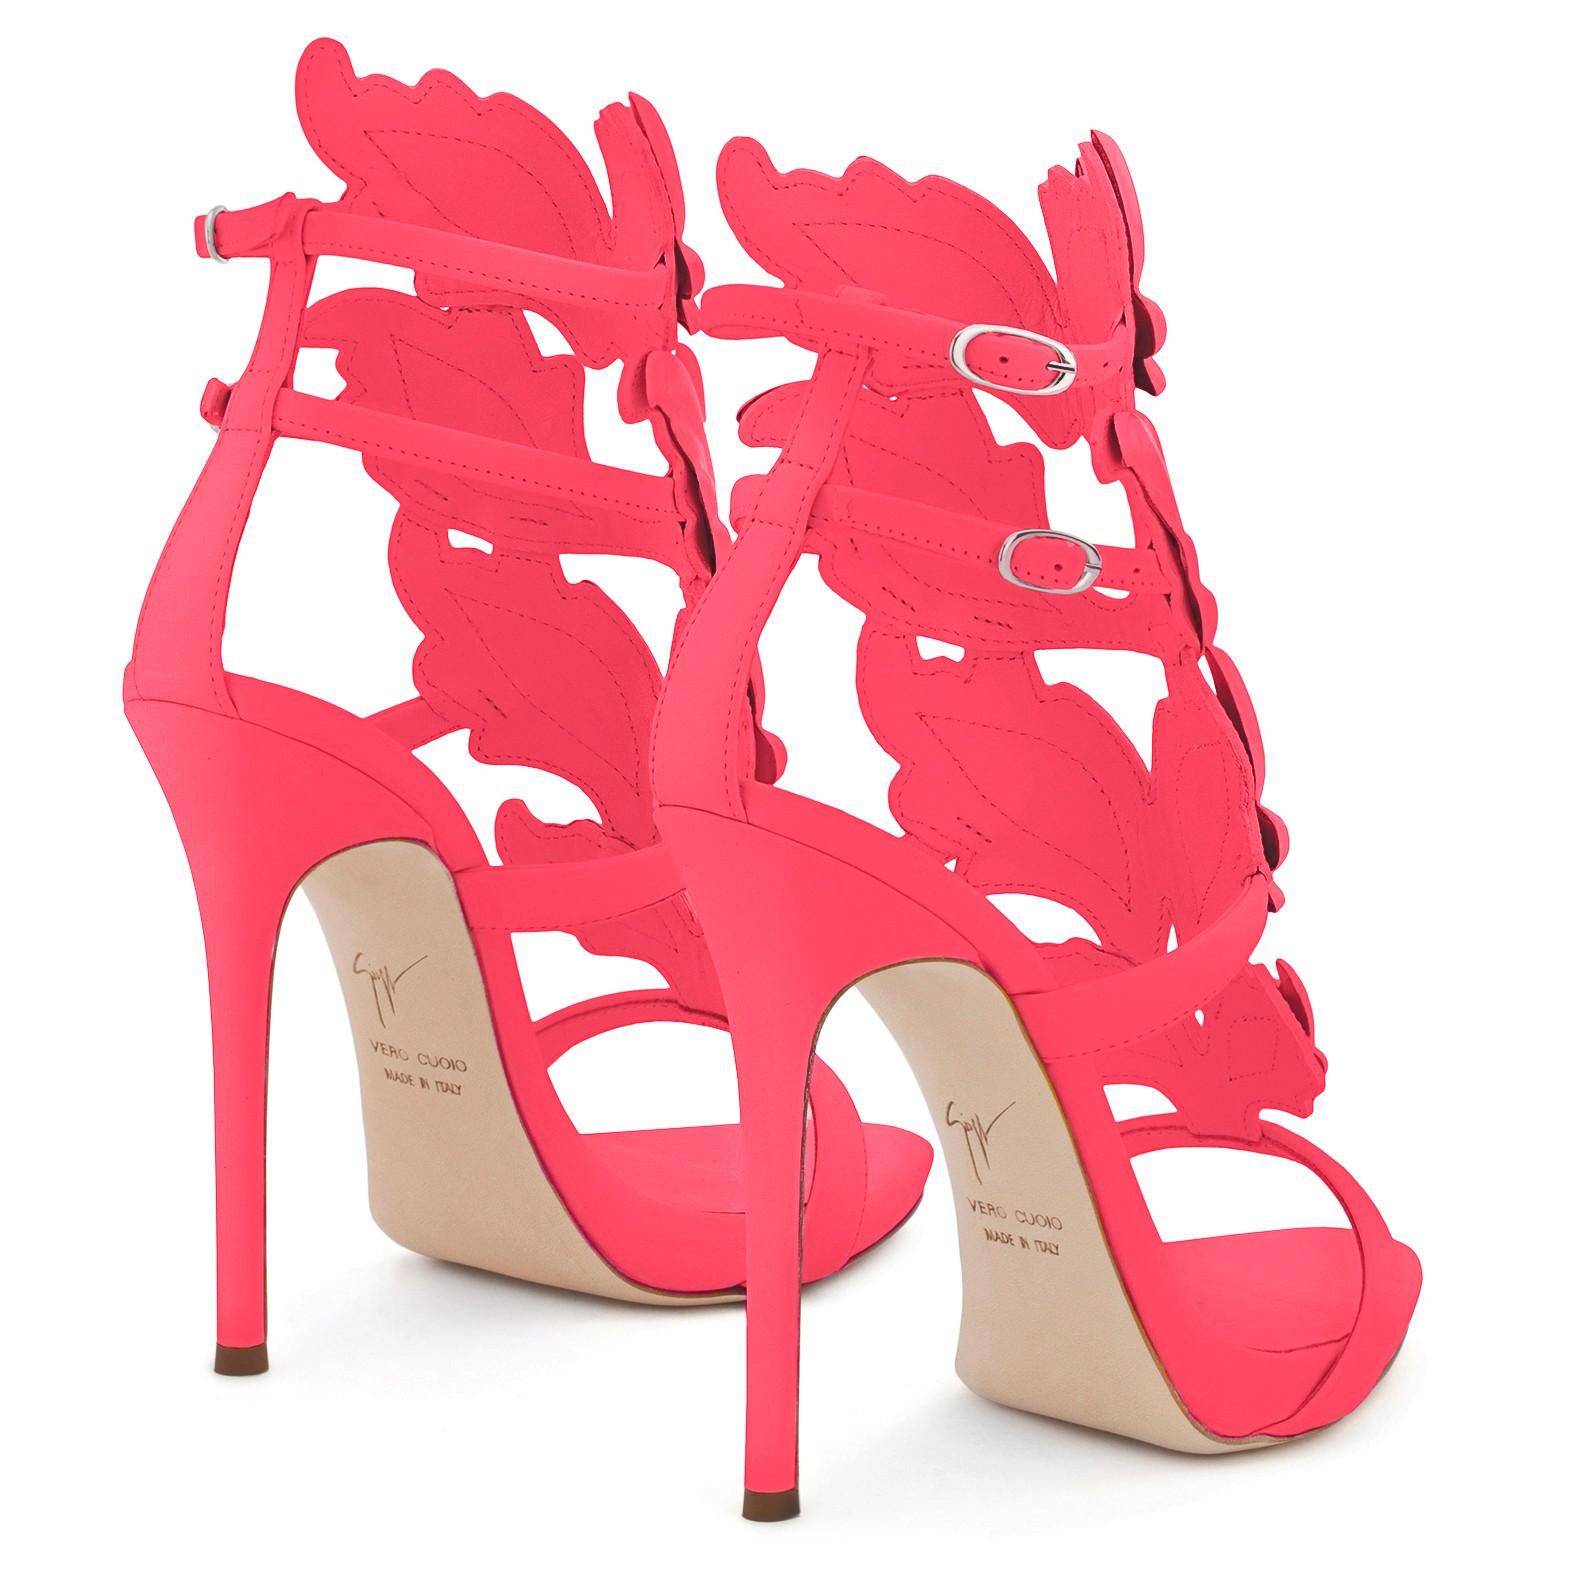 Giuseppe Zanotti NEW Coral Pink Leather Metal Evening Sandals Heels in Box 1